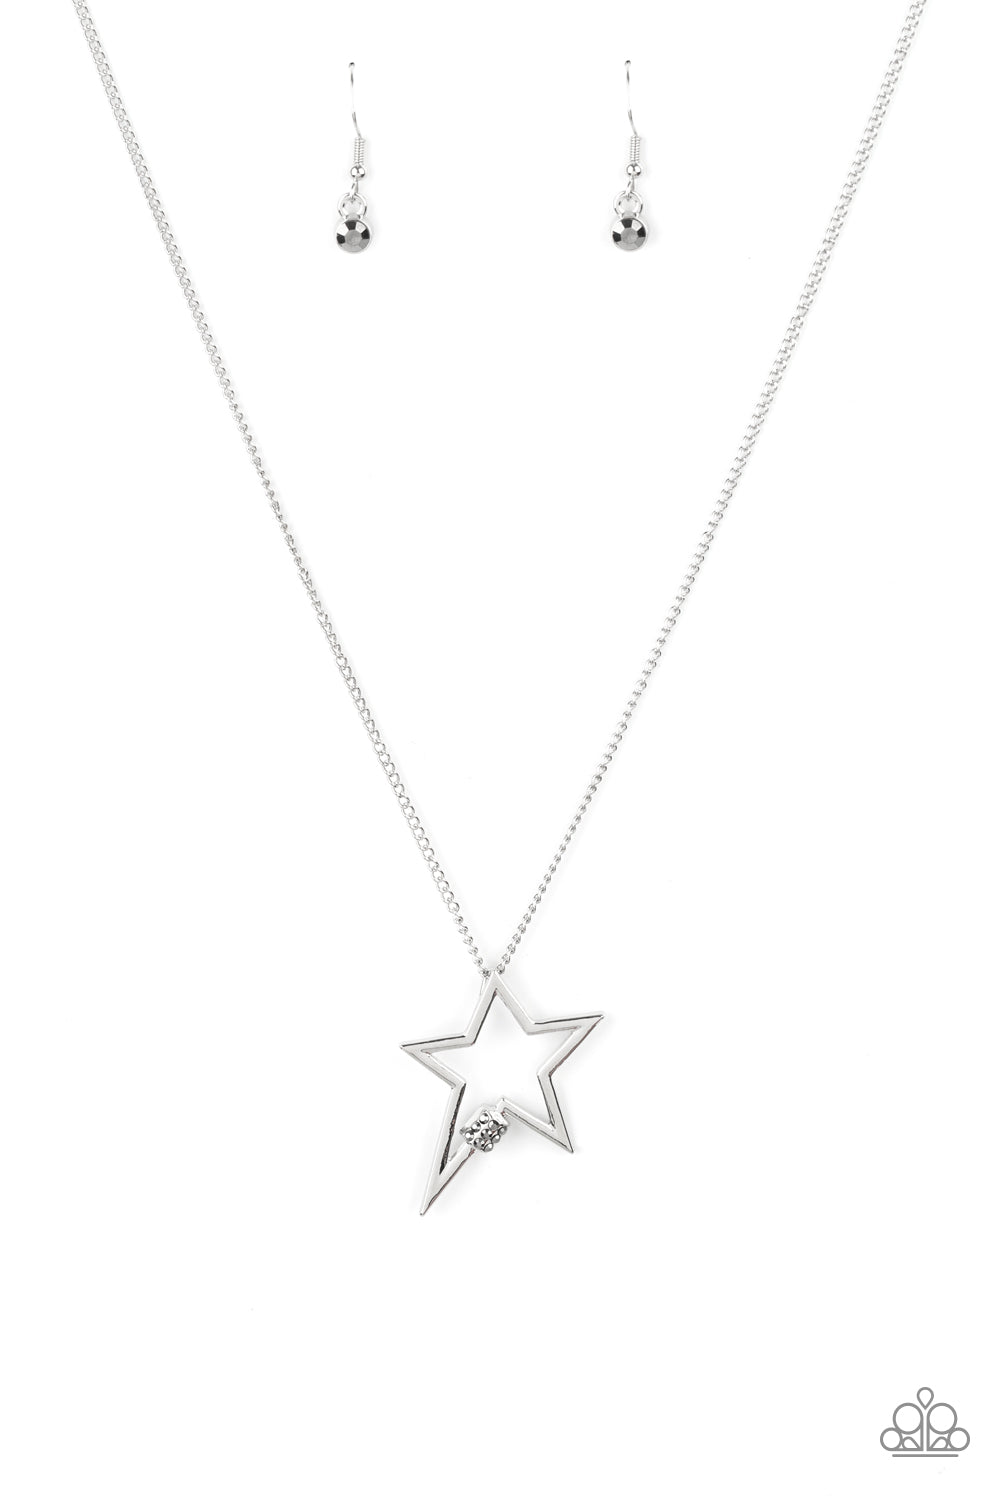 Paparazzi Necklaces - Light Up The Sky - Silver